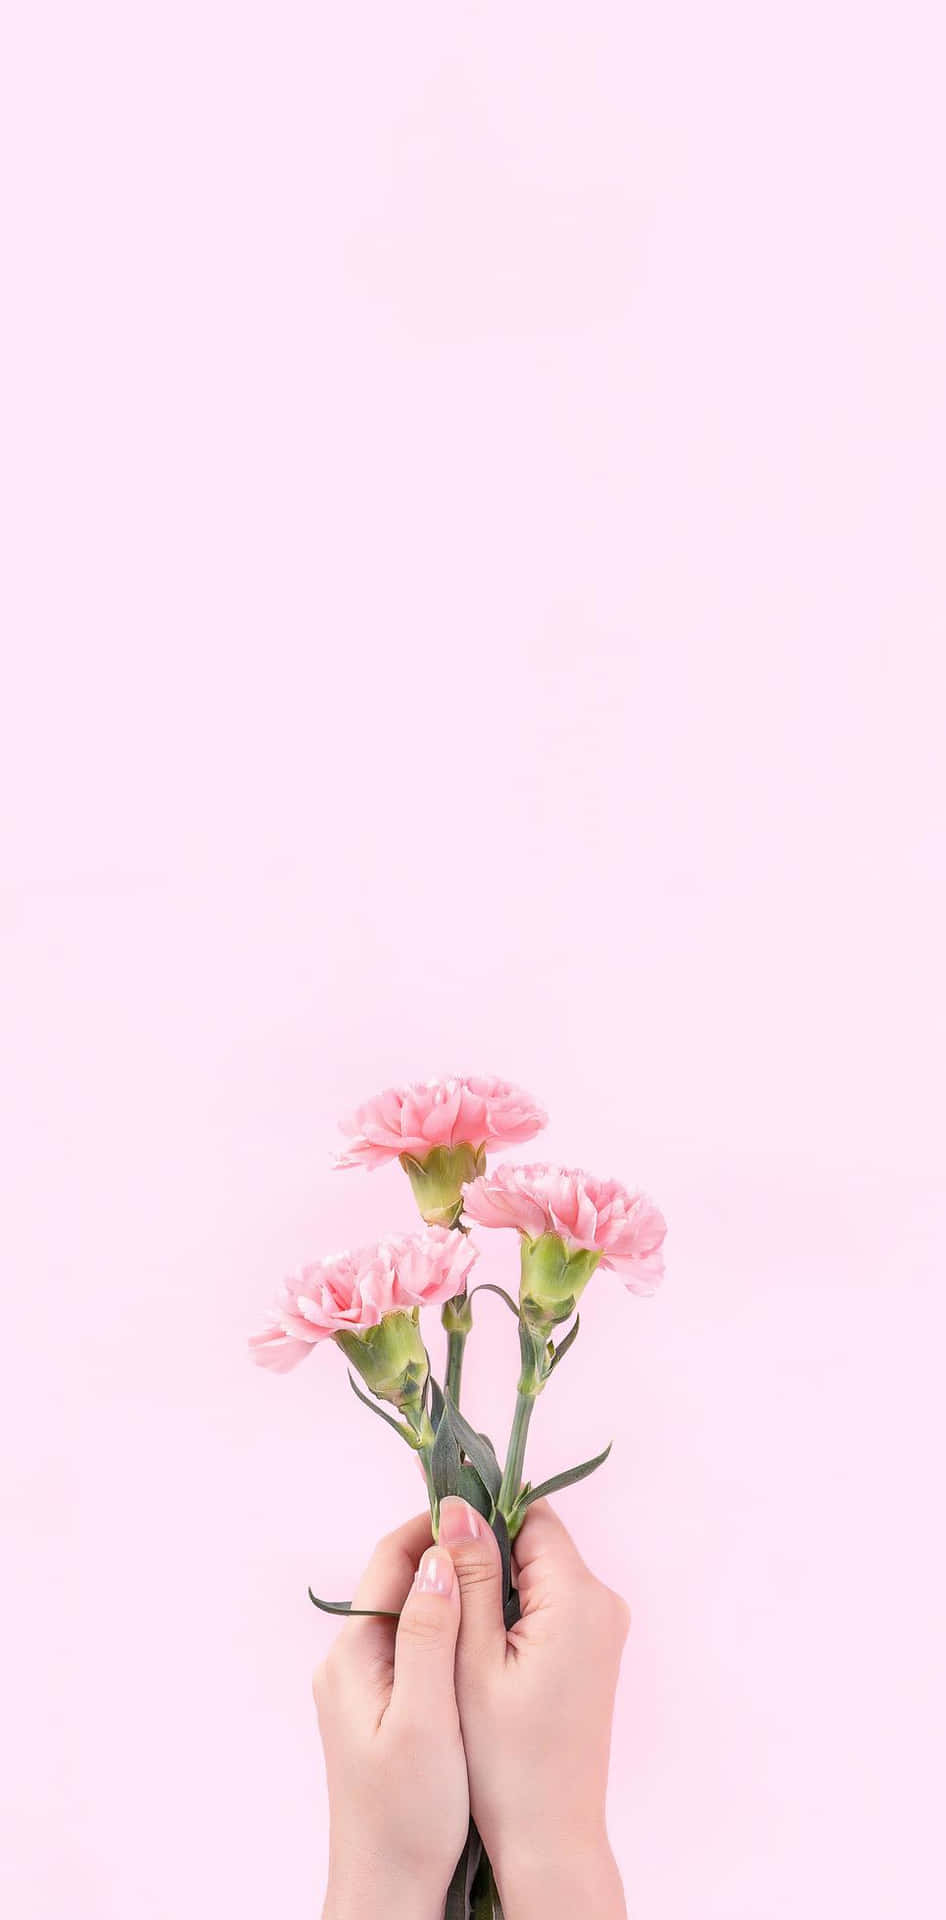 100+] Aesthetic Baby Pink Background s 